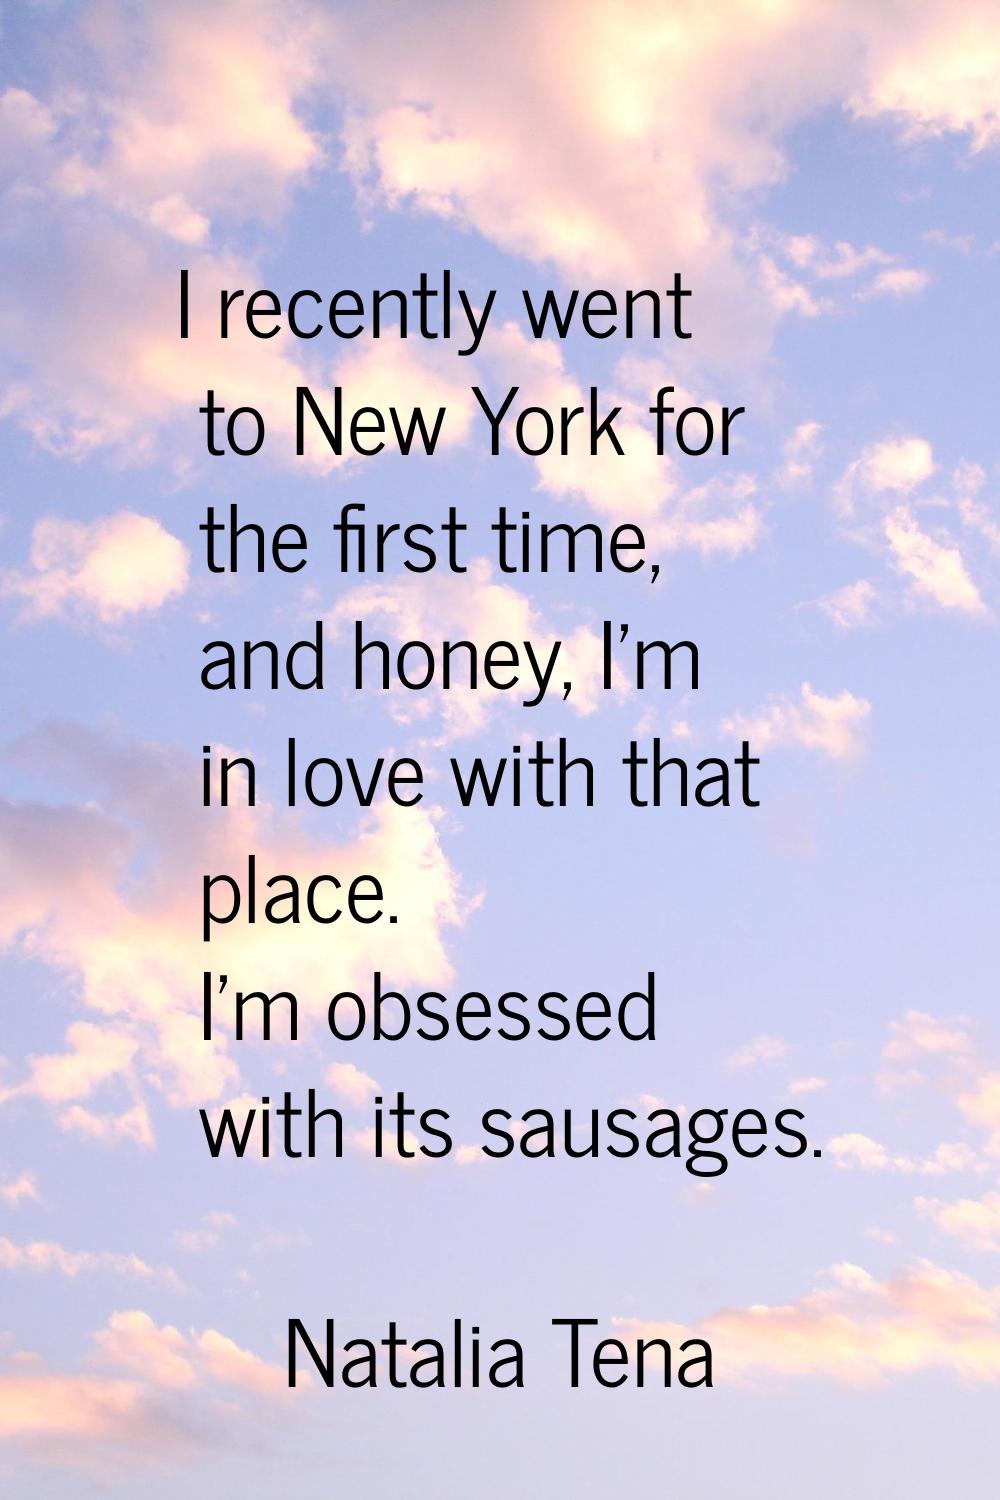 I recently went to New York for the first time, and honey, I'm in love with that place. I'm obsesse